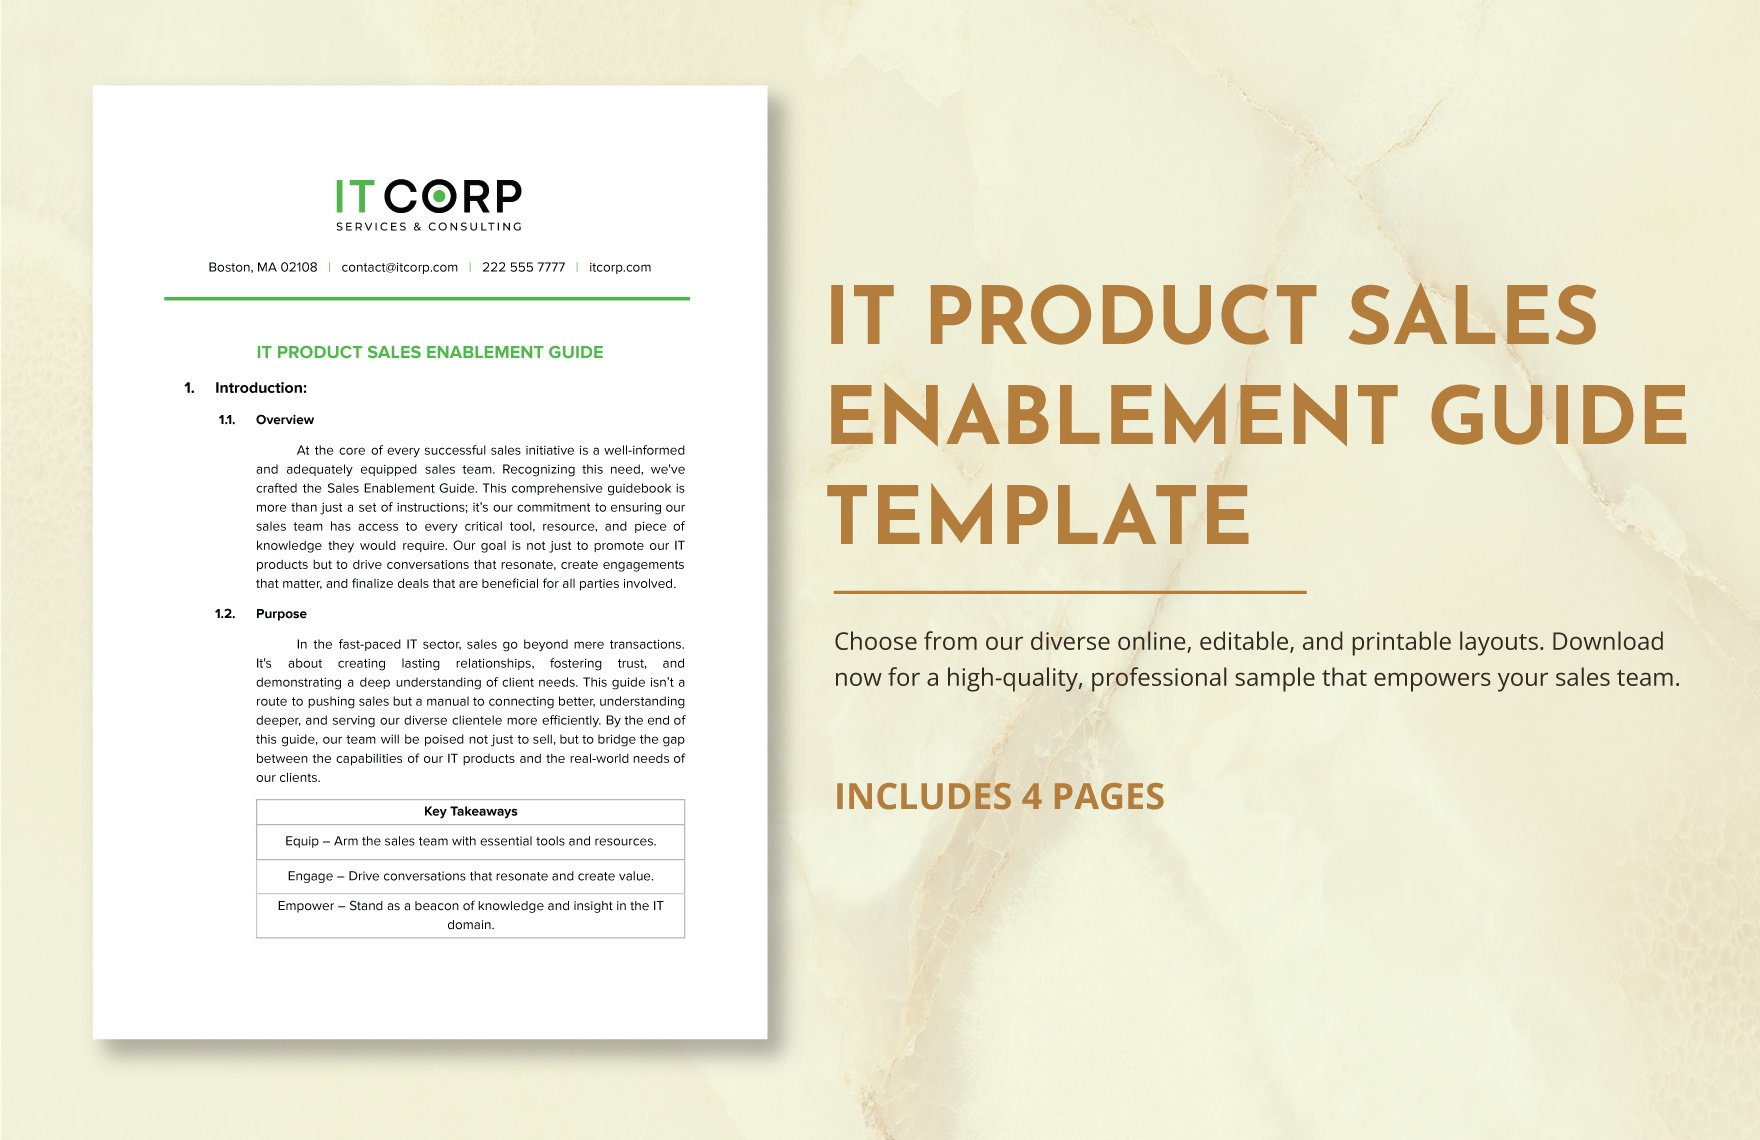 IT Product Sales Enablement Guide Template